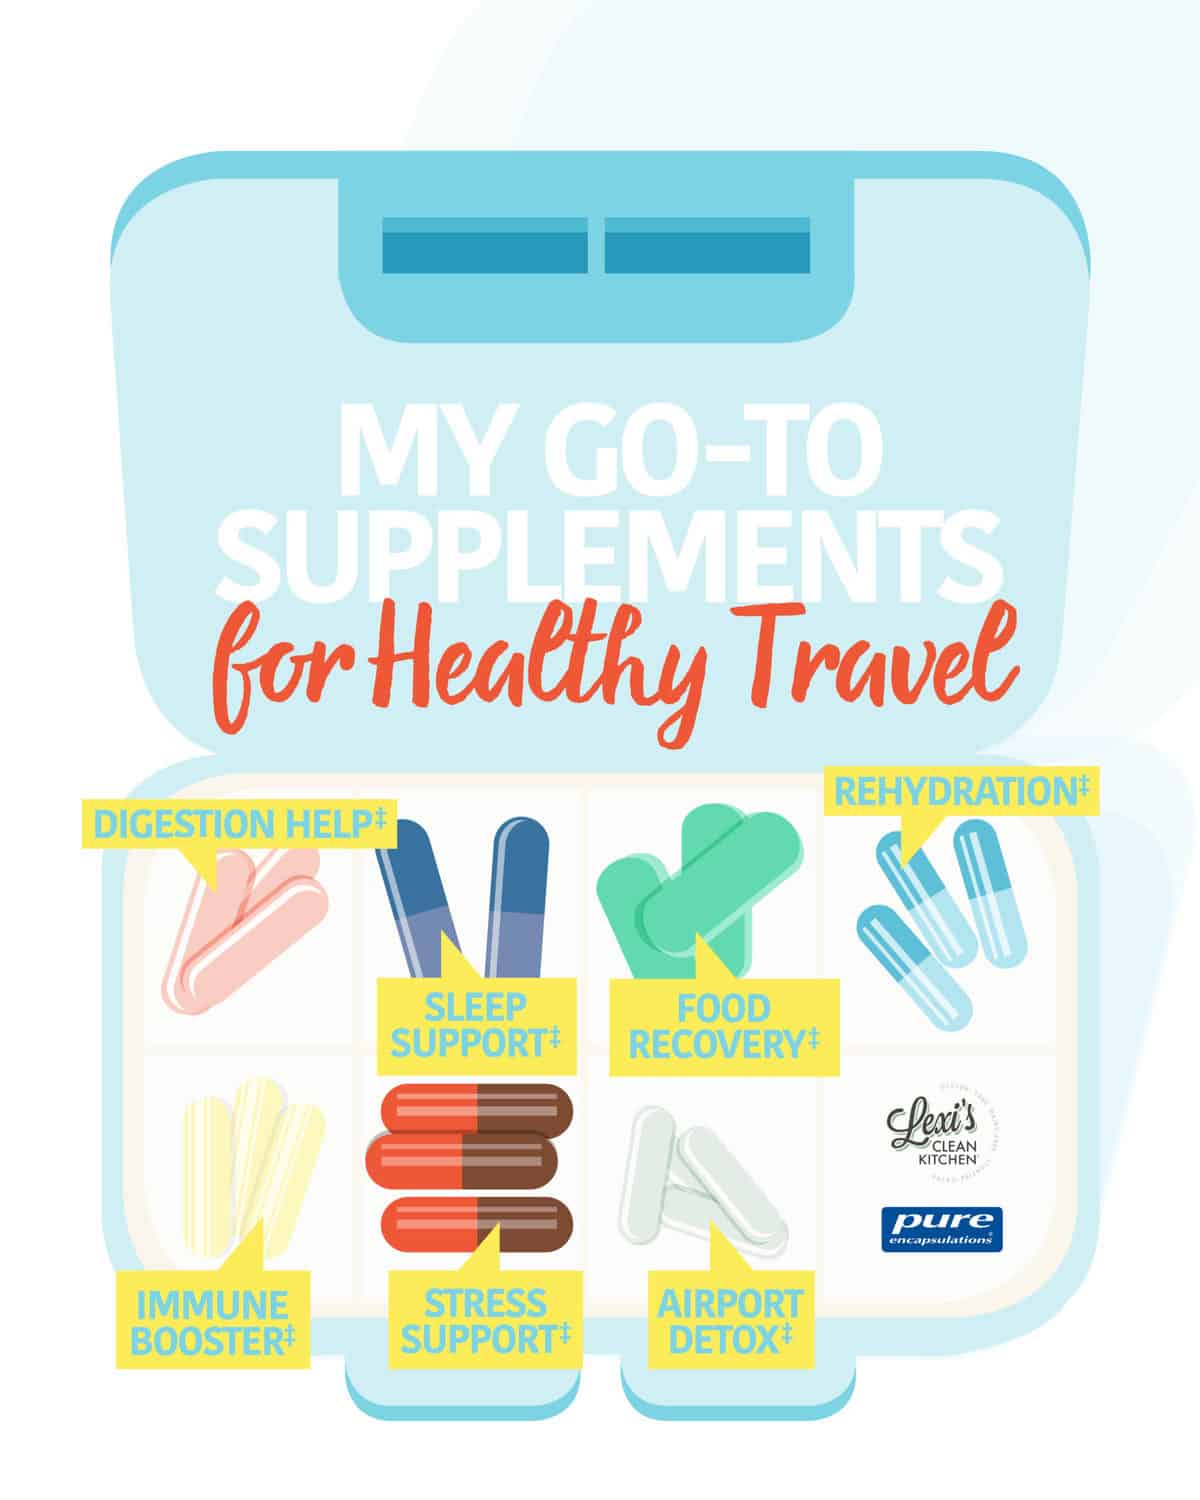 My Must-Have Travel Supplements